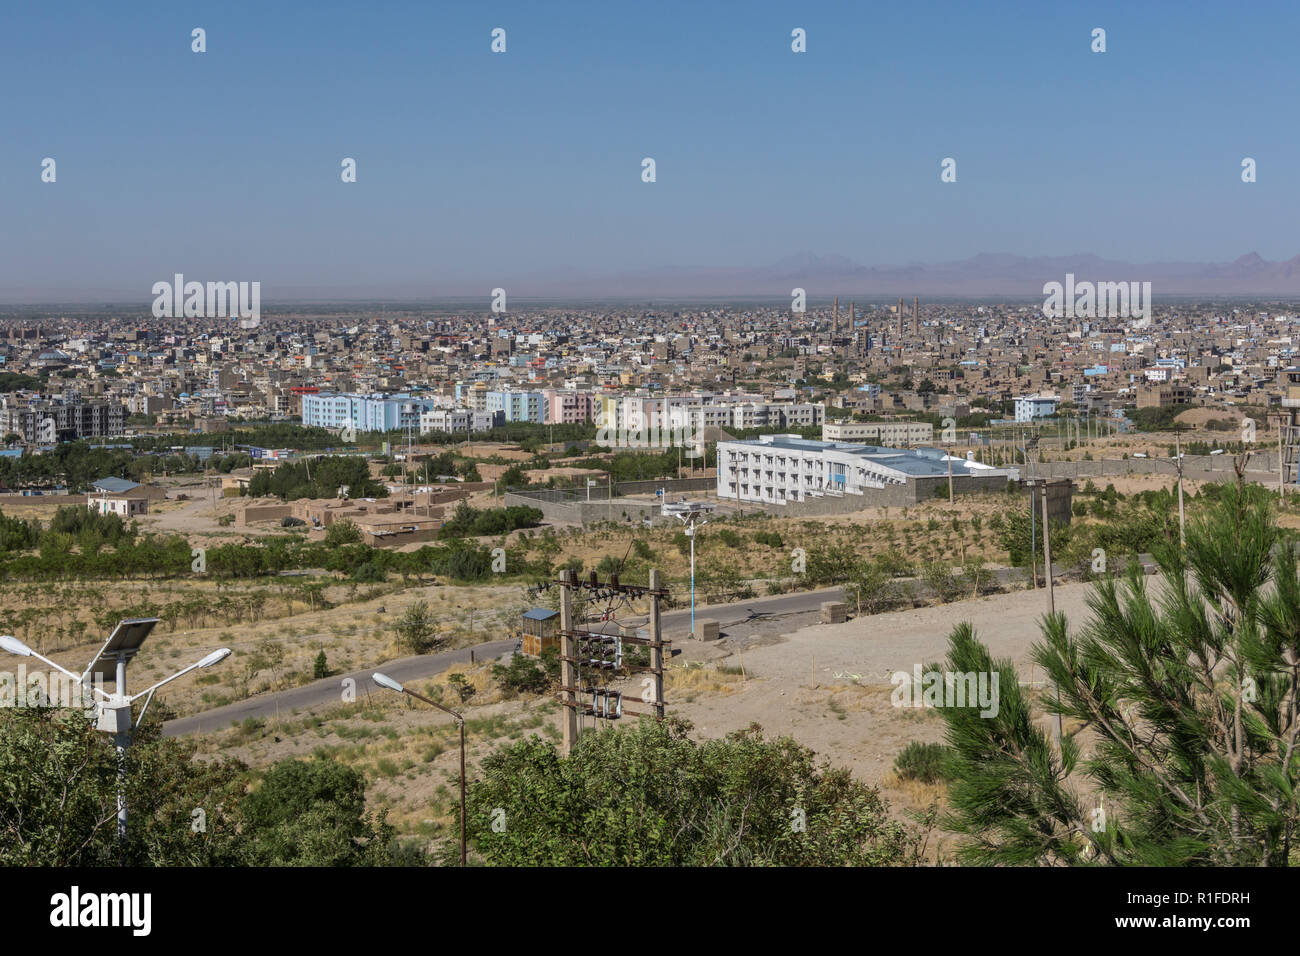 View of Herat, Afghanistan Stock Photo